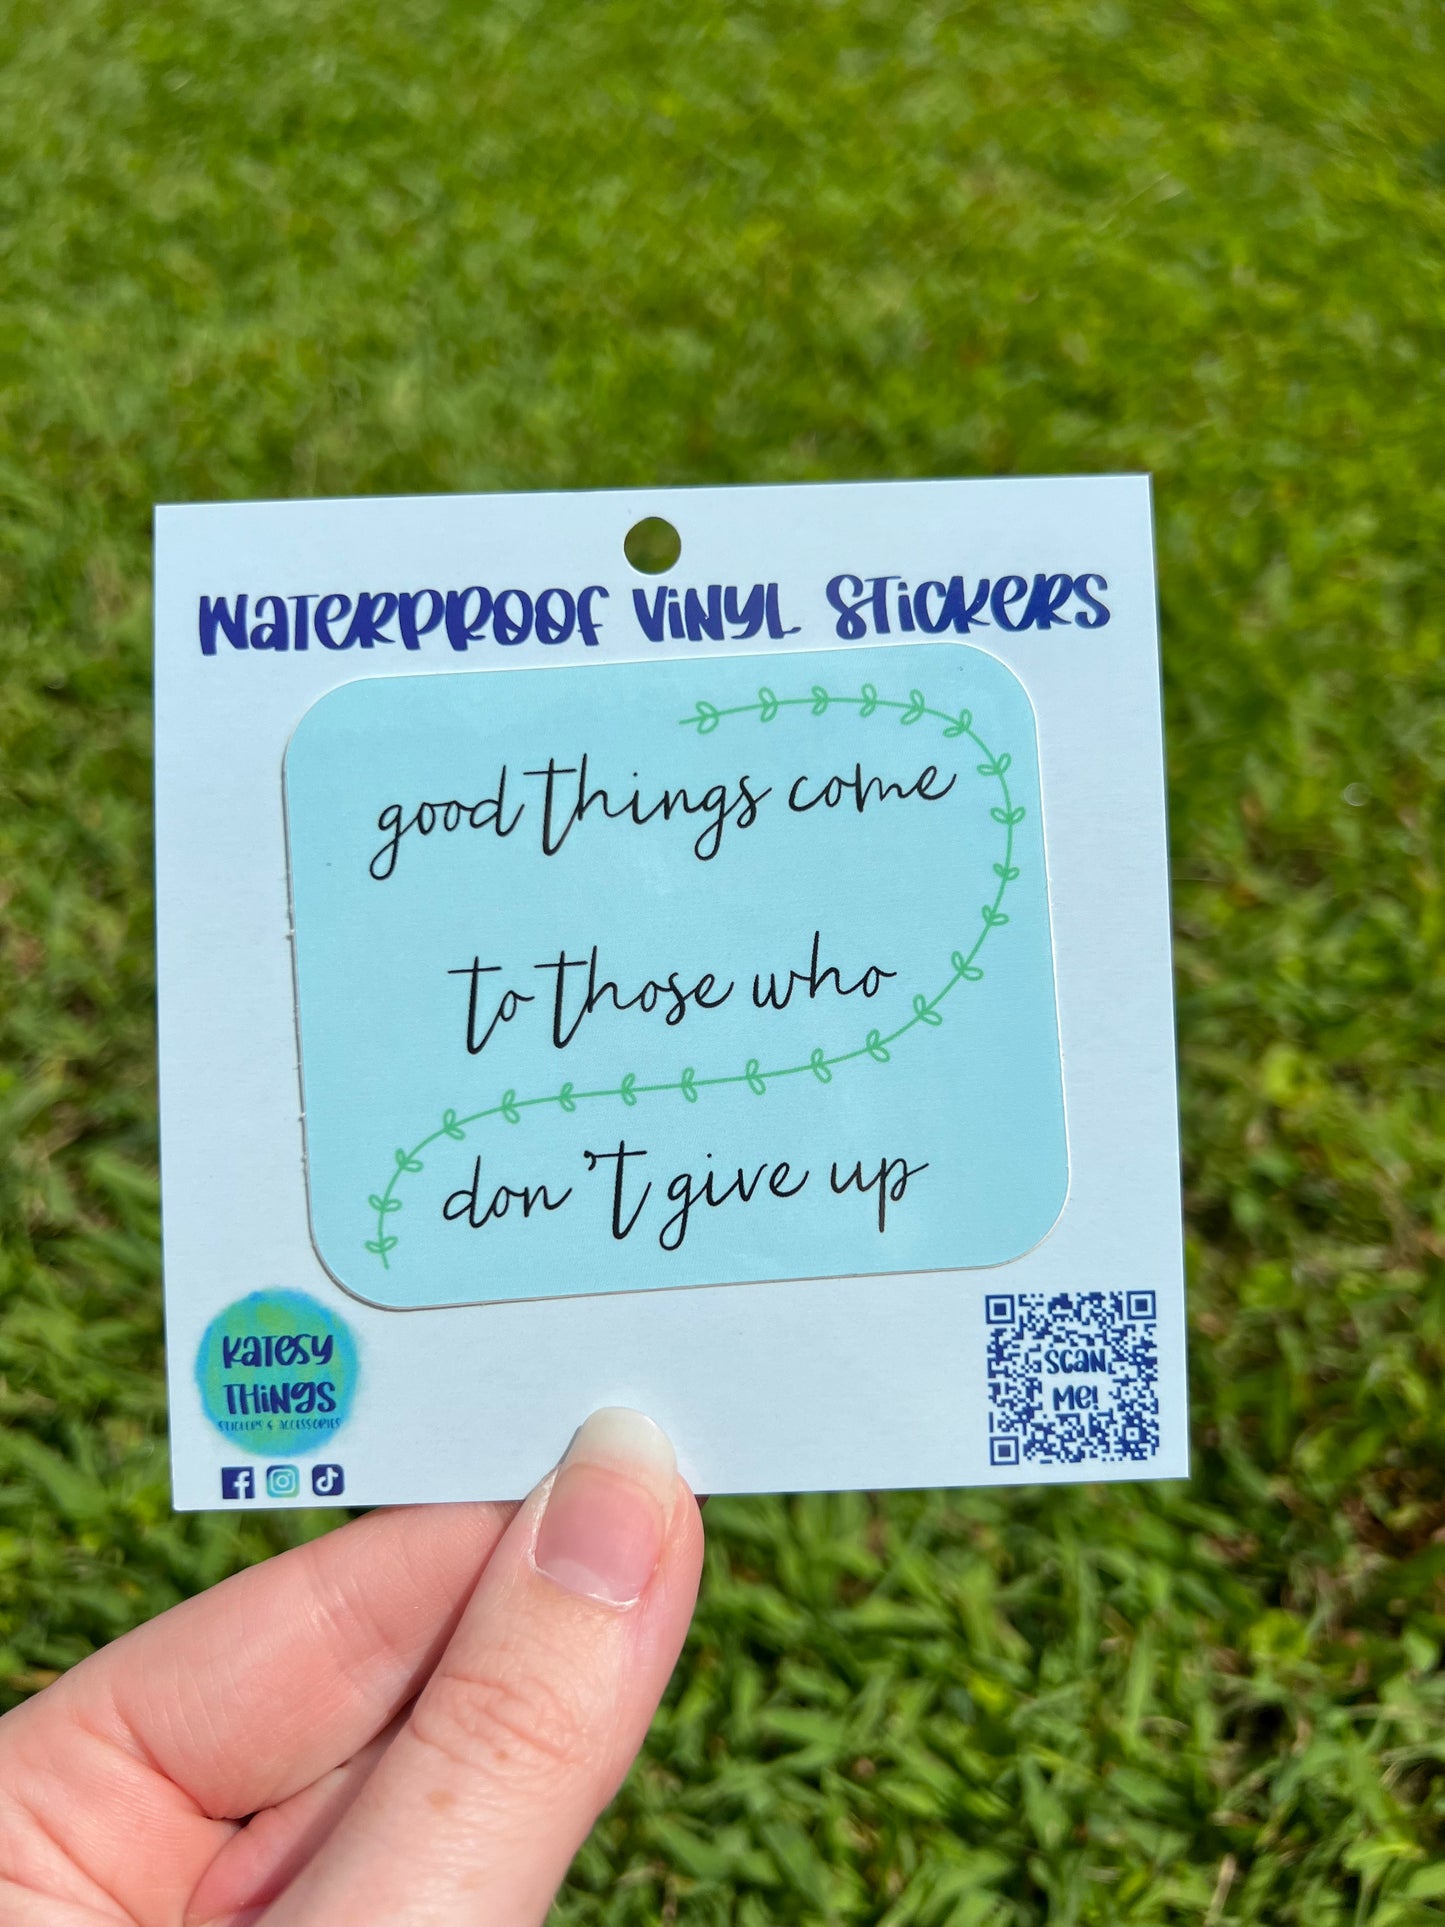 Good Things Come to Those Who Don’t Give Up Vinyl Sticker